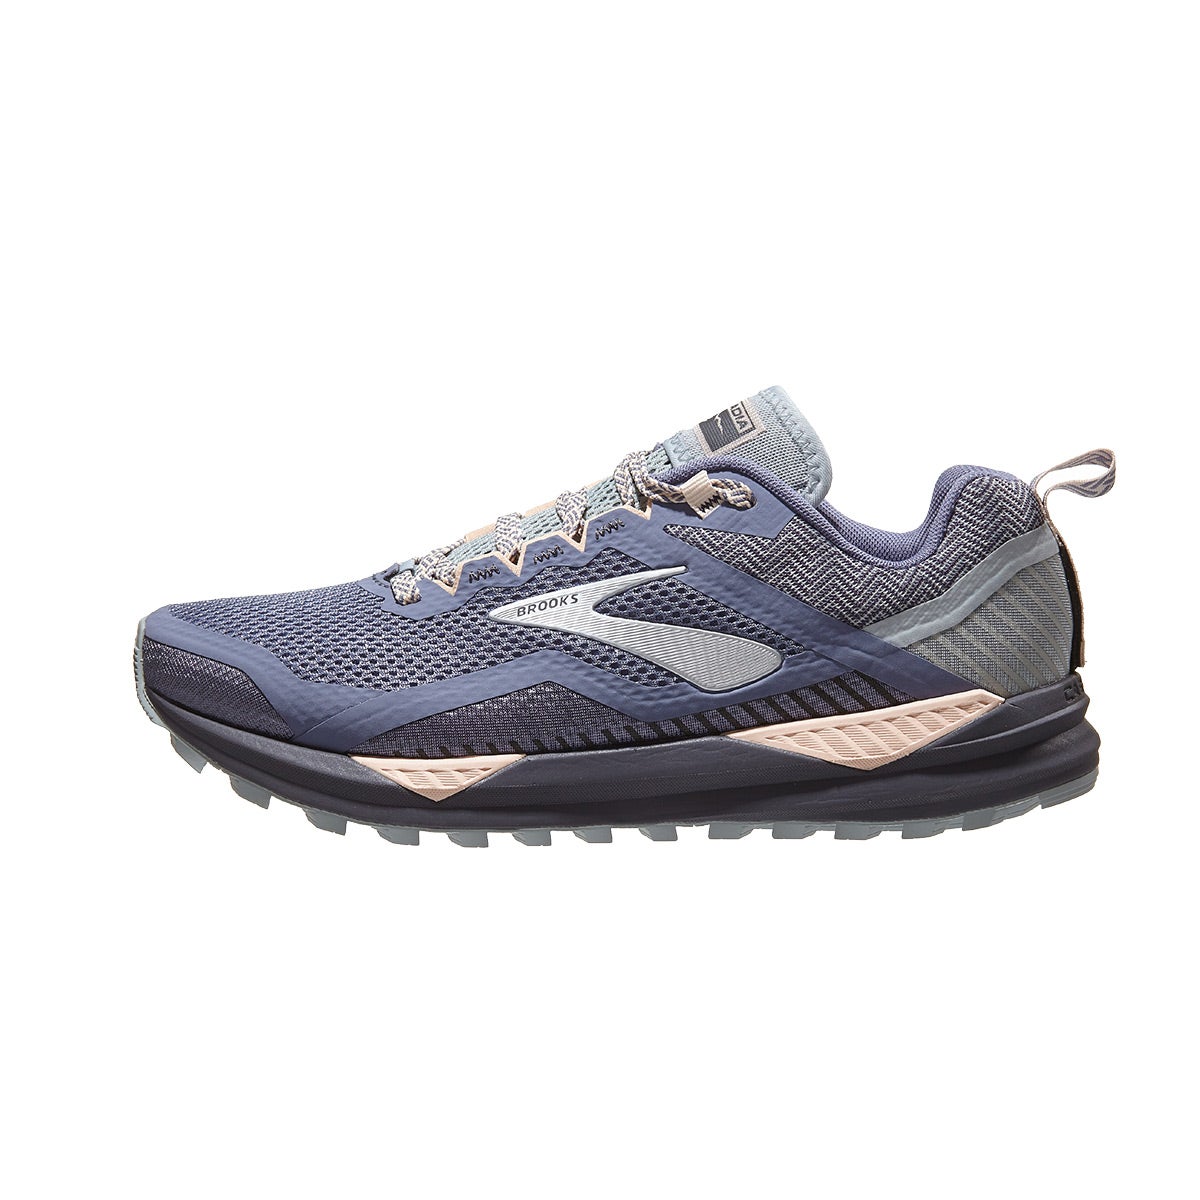 Brooks Cascadia 14 Women's Shoes Grey/Pale Peach/Pearl 360° View ...